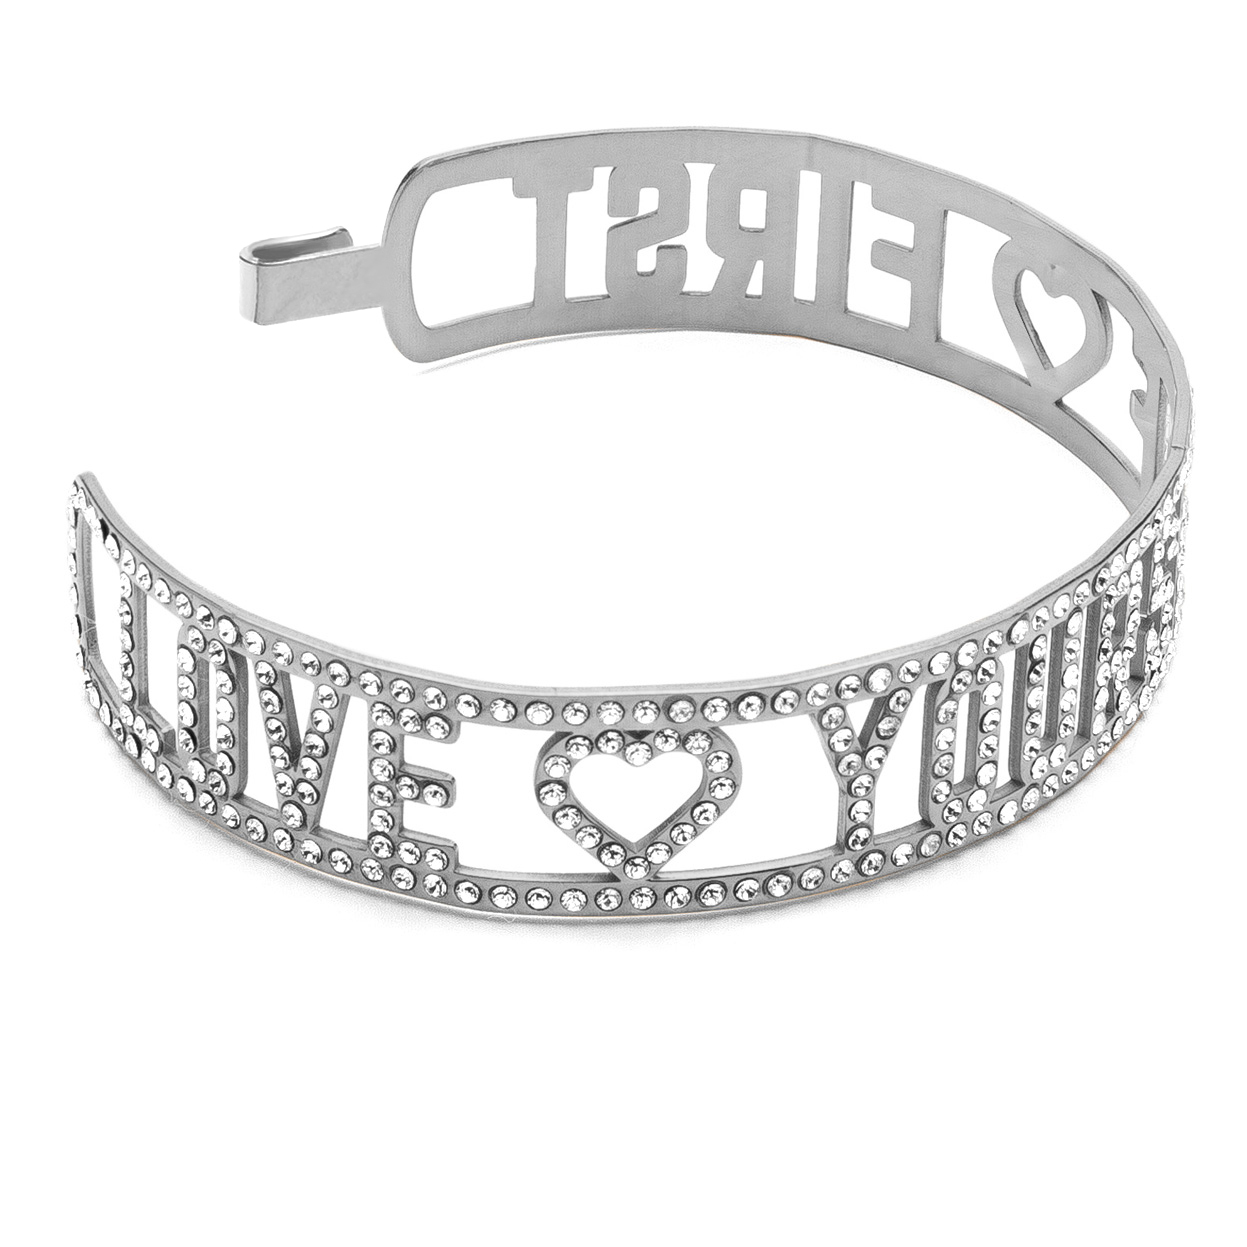 LOVE YOURSELF FIRST BANGLE BRACELET WITH SWAROVSKI CRYSTALS, STERLING SILVER 925